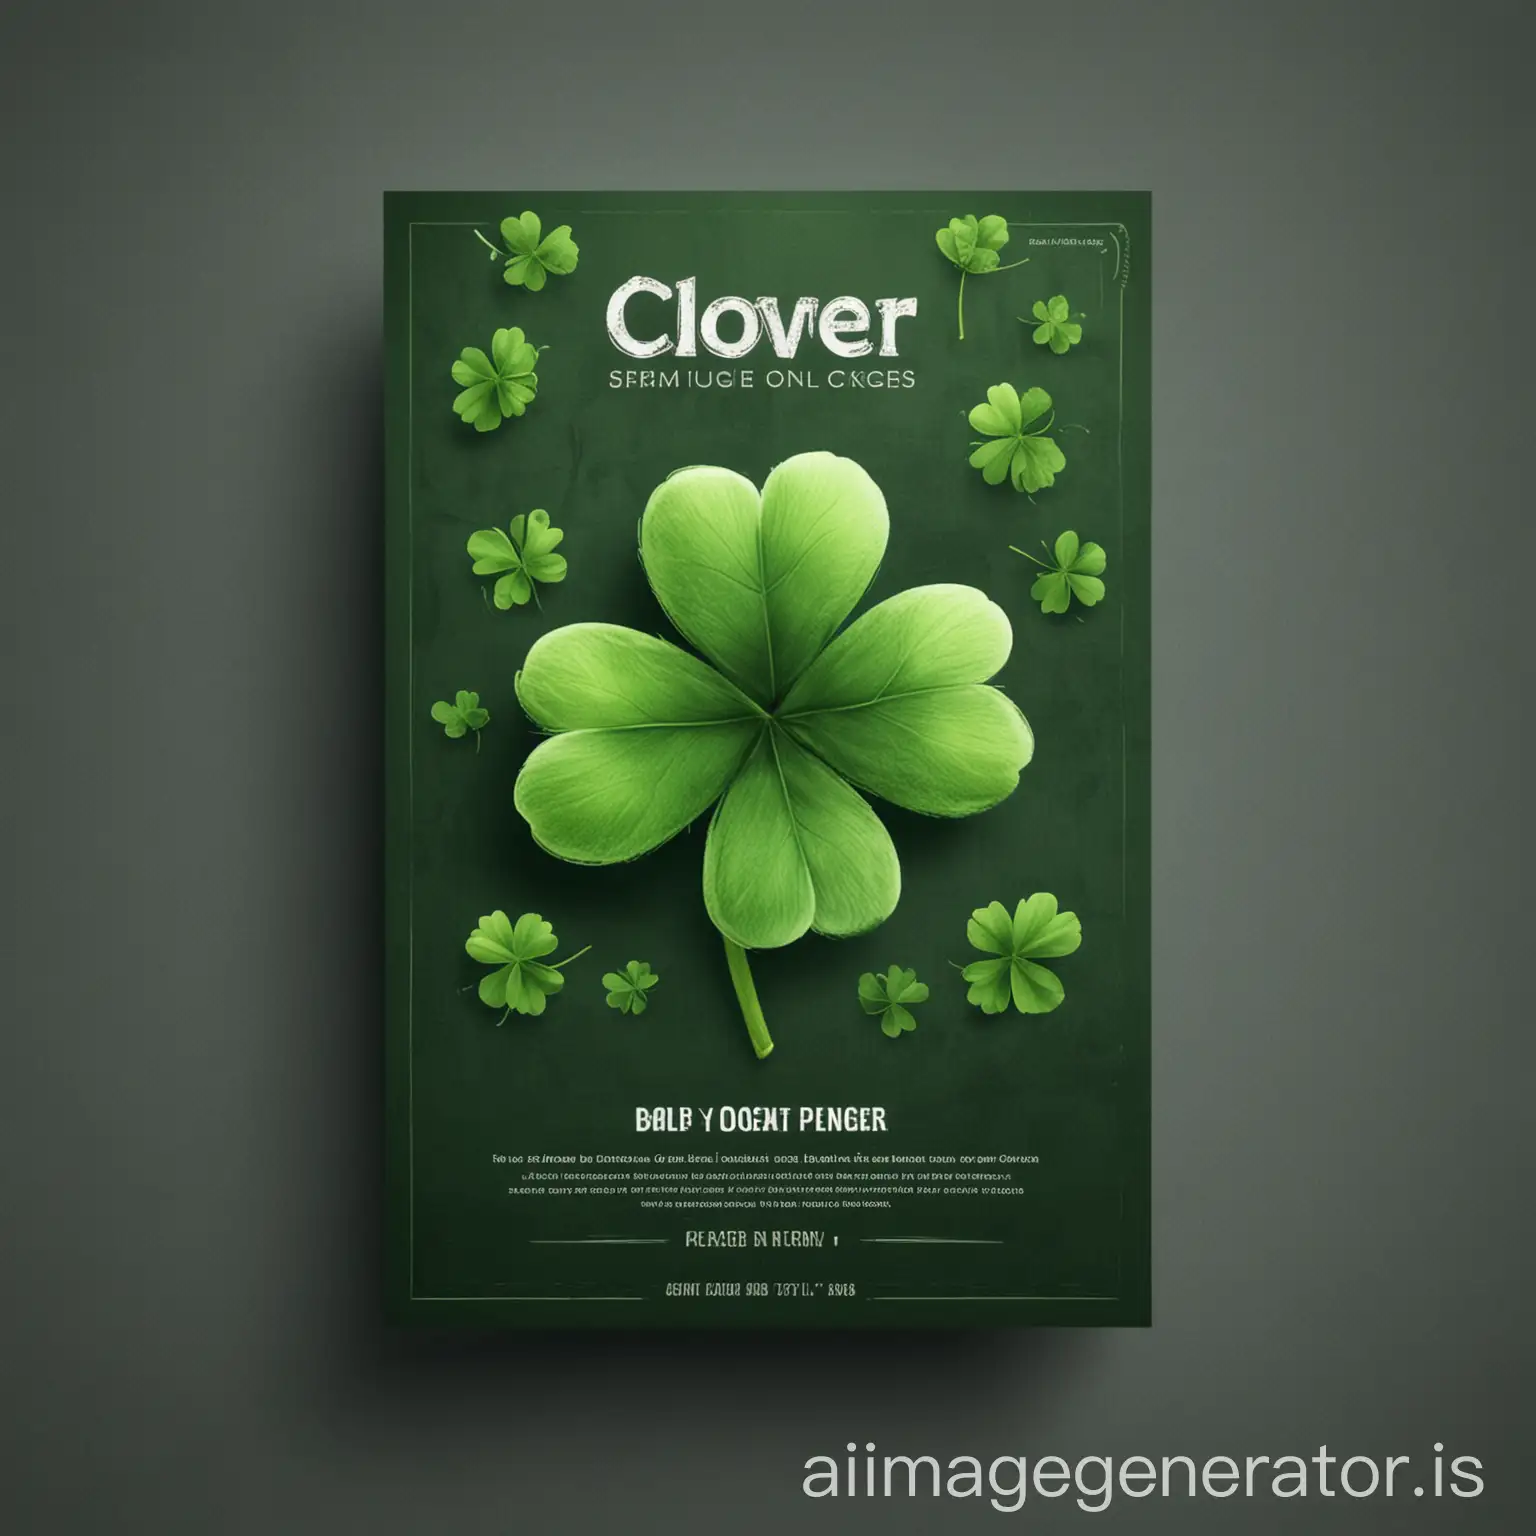 Vibrant-Clover-Promotional-Design-Template-Cheerful-Greenery-for-Festive-Marketing